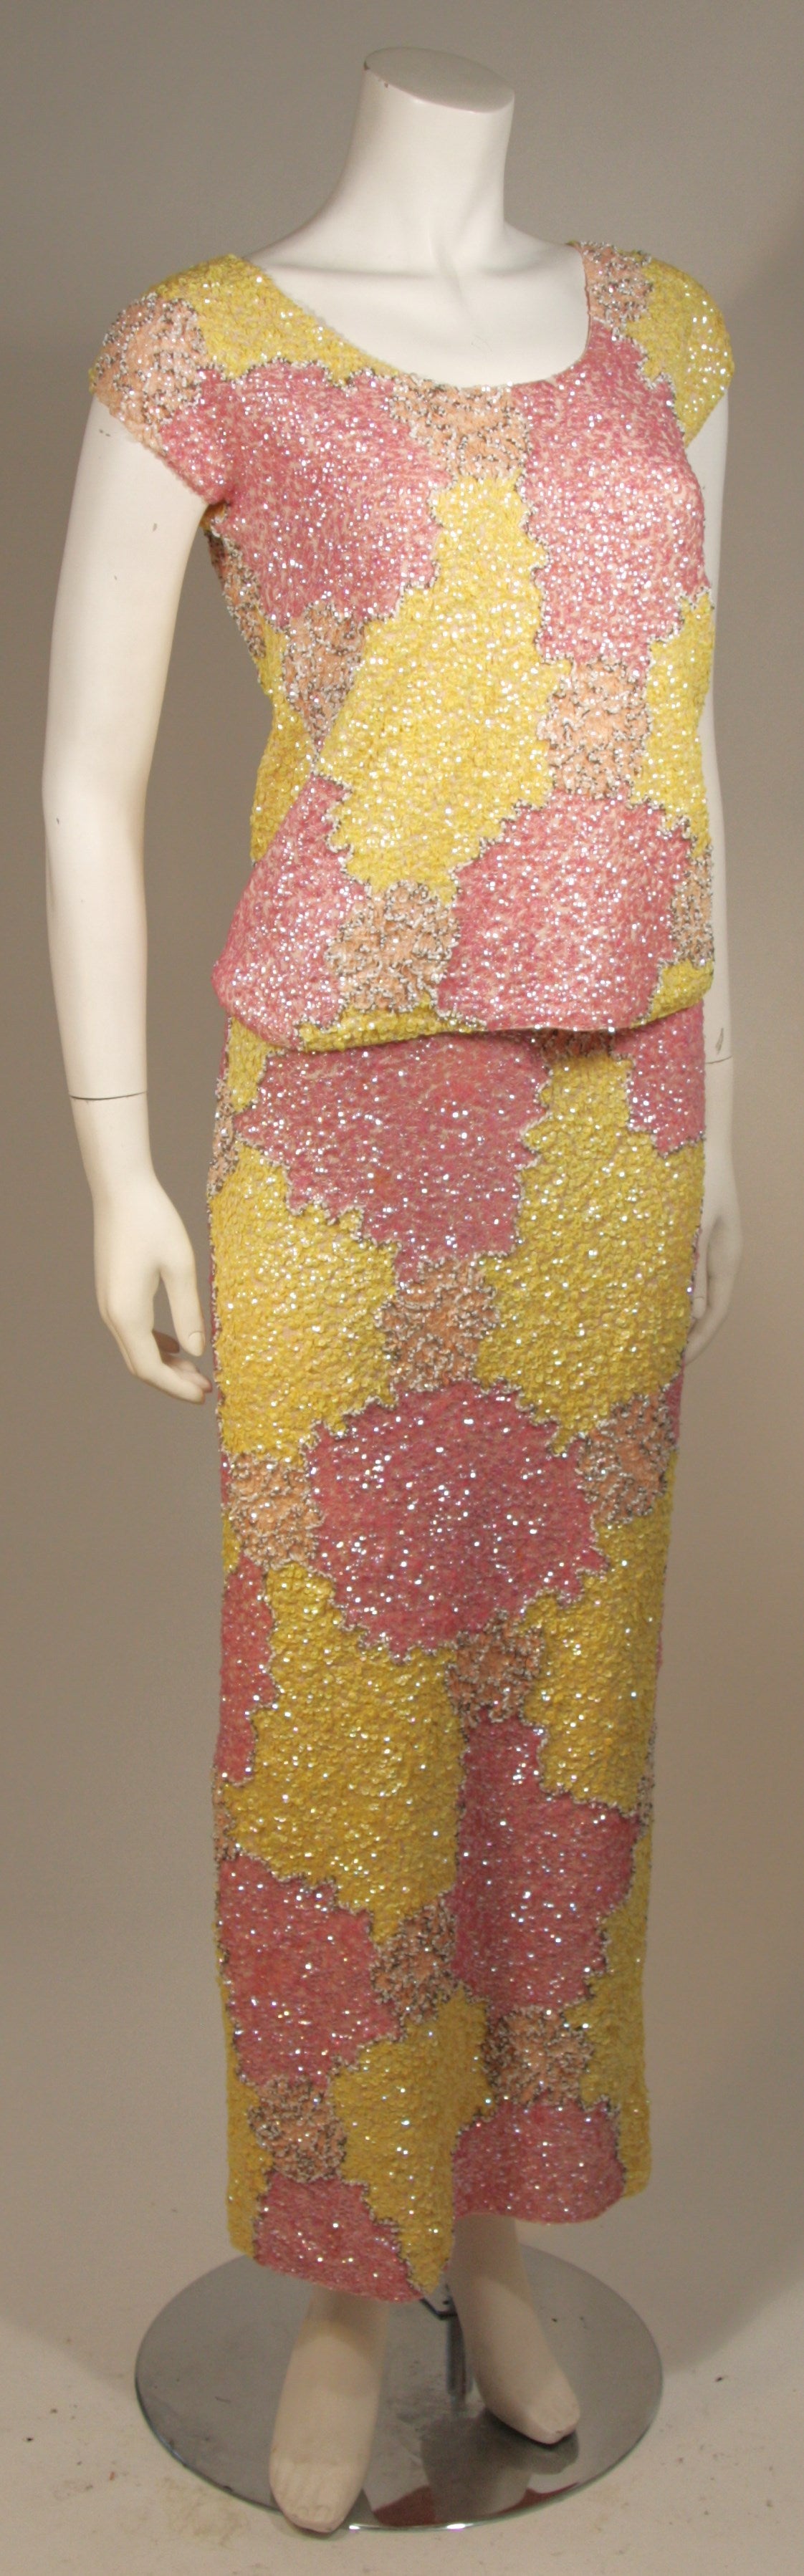 Gene Shelly's Yellow and Pink Stretch Wool Abstract Sequin Motif Evening Set 6-8 In Excellent Condition For Sale In Los Angeles, CA